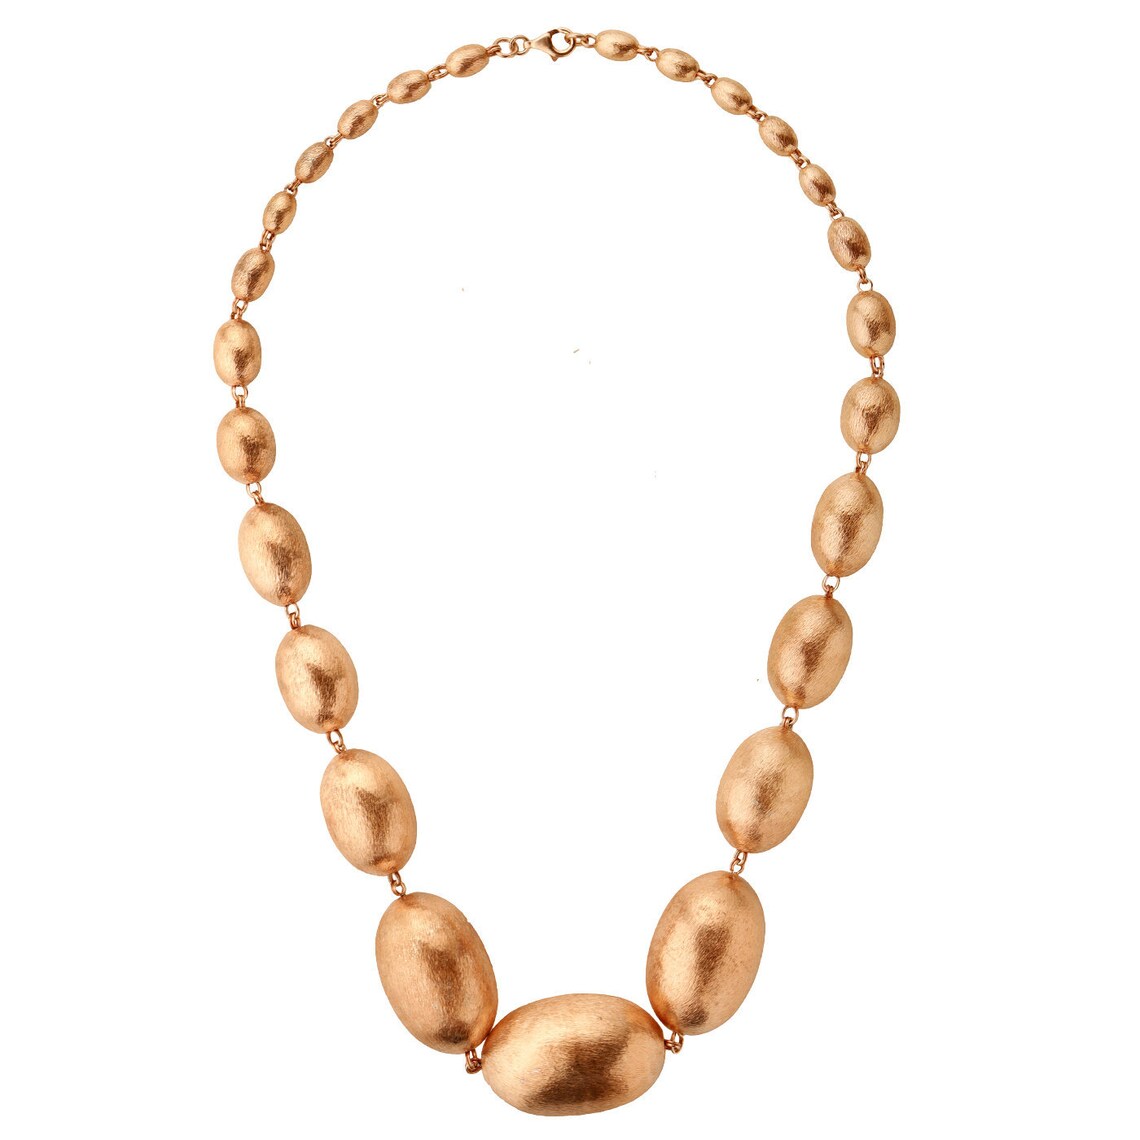 Bib Necklace, Statement Jewelry, Sterling Silver 925 Egg shape necklace Rose Gold Plating on silver